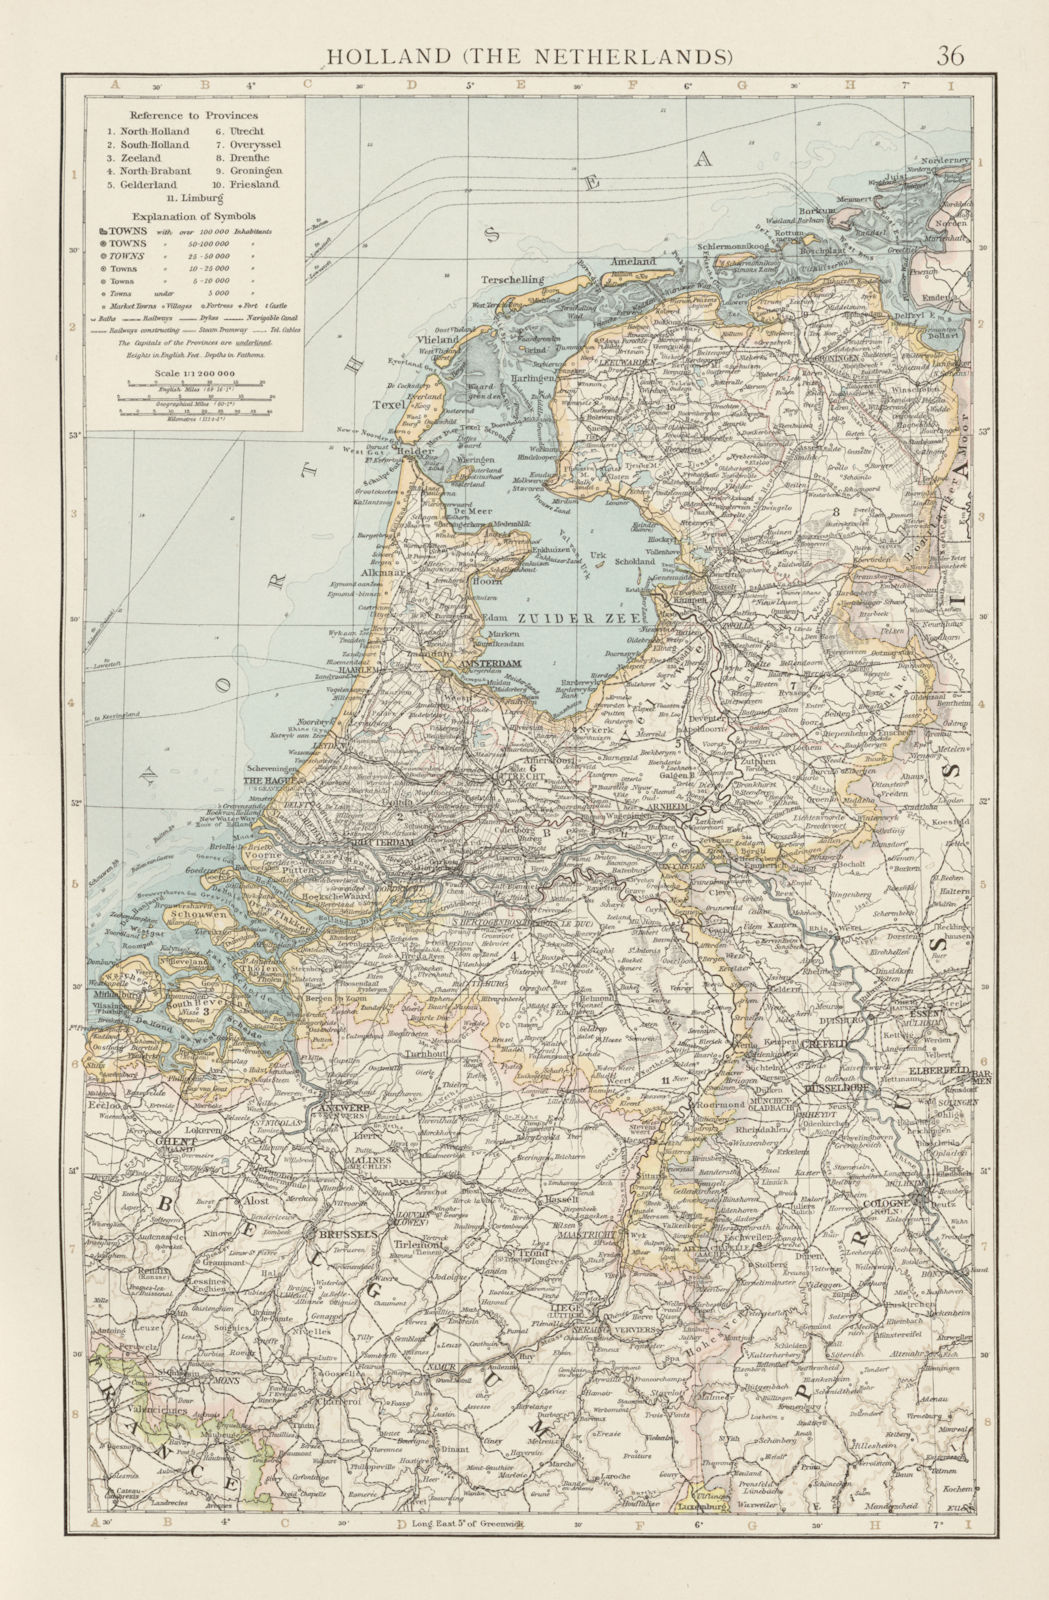 Holland (The Netherlands). Dykes Canals Railways. THE TIMES 1900 old map